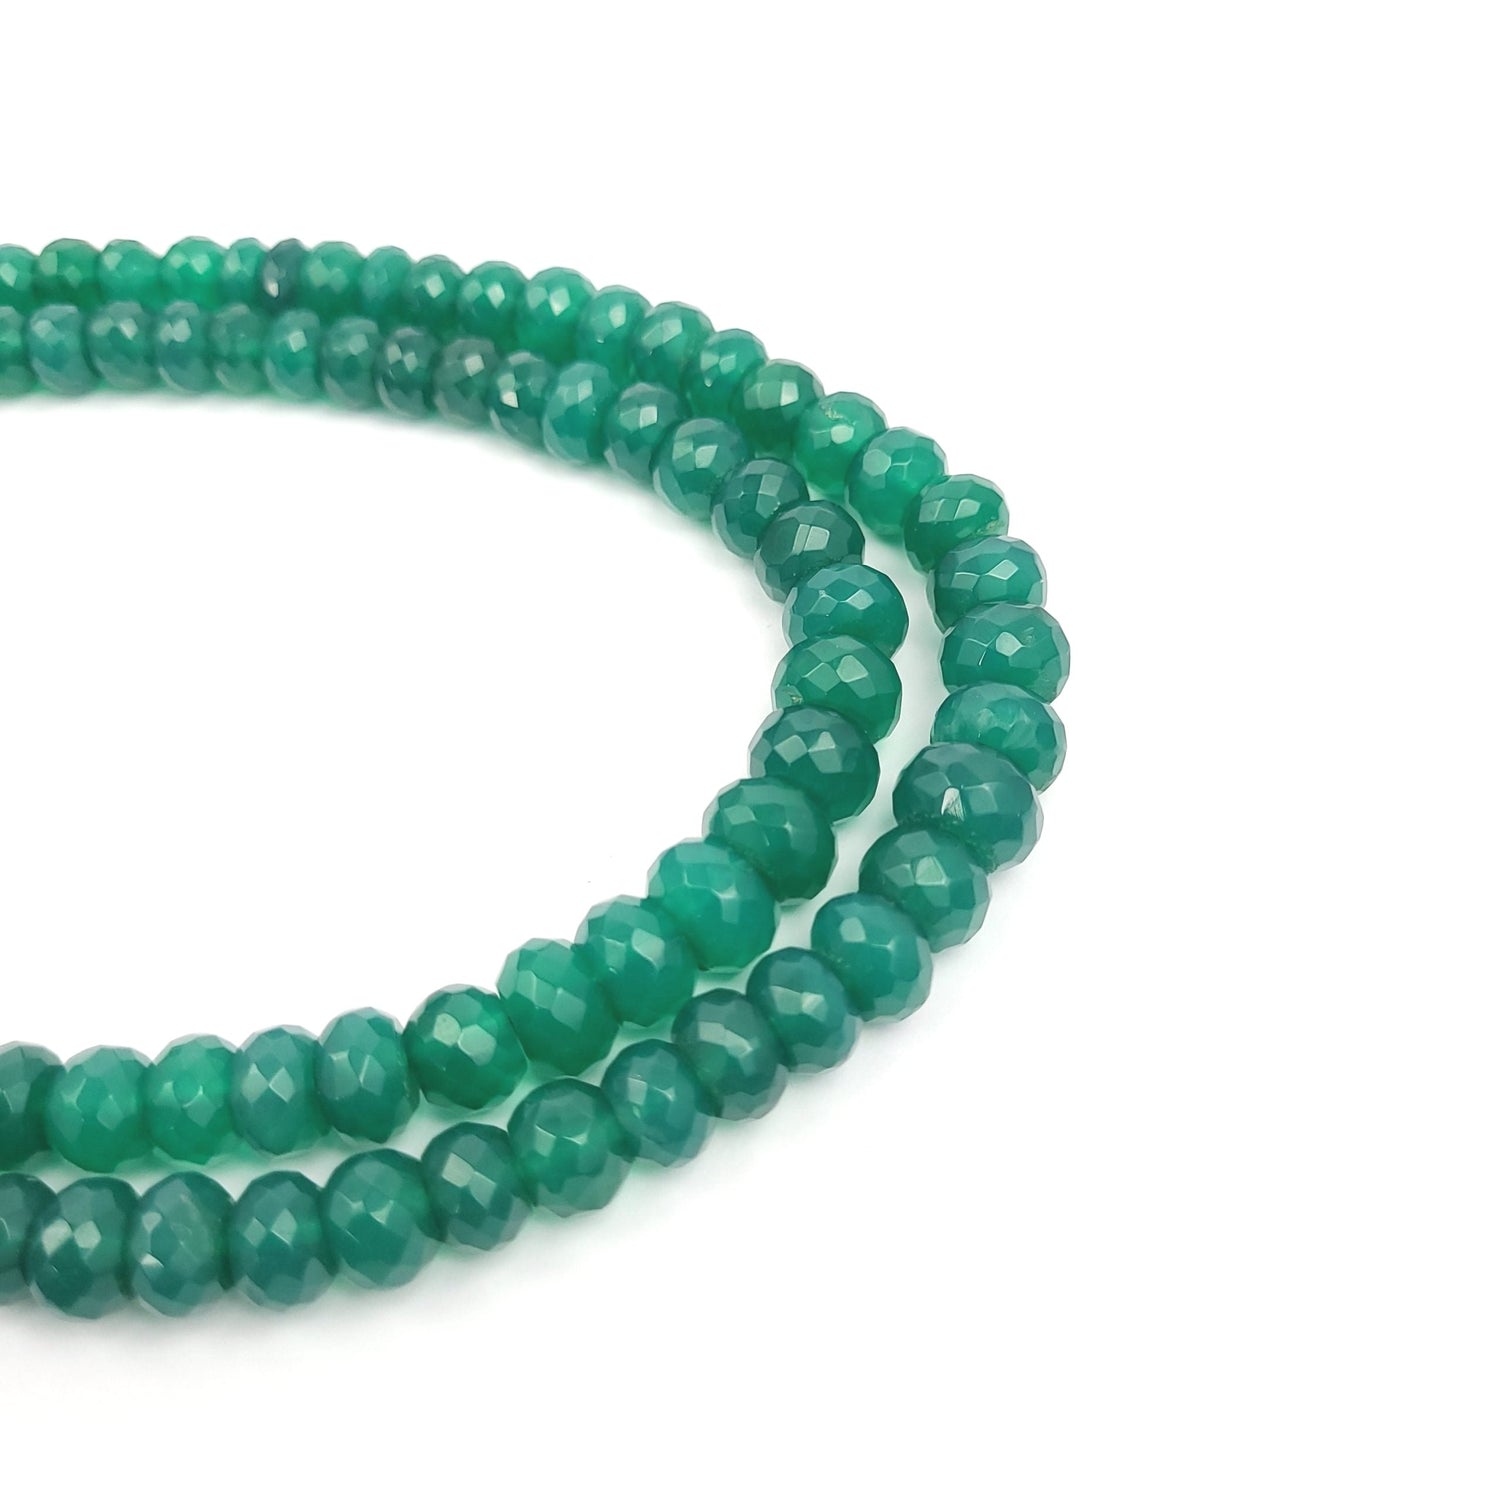 Onyx Green 2 Layered Necklace